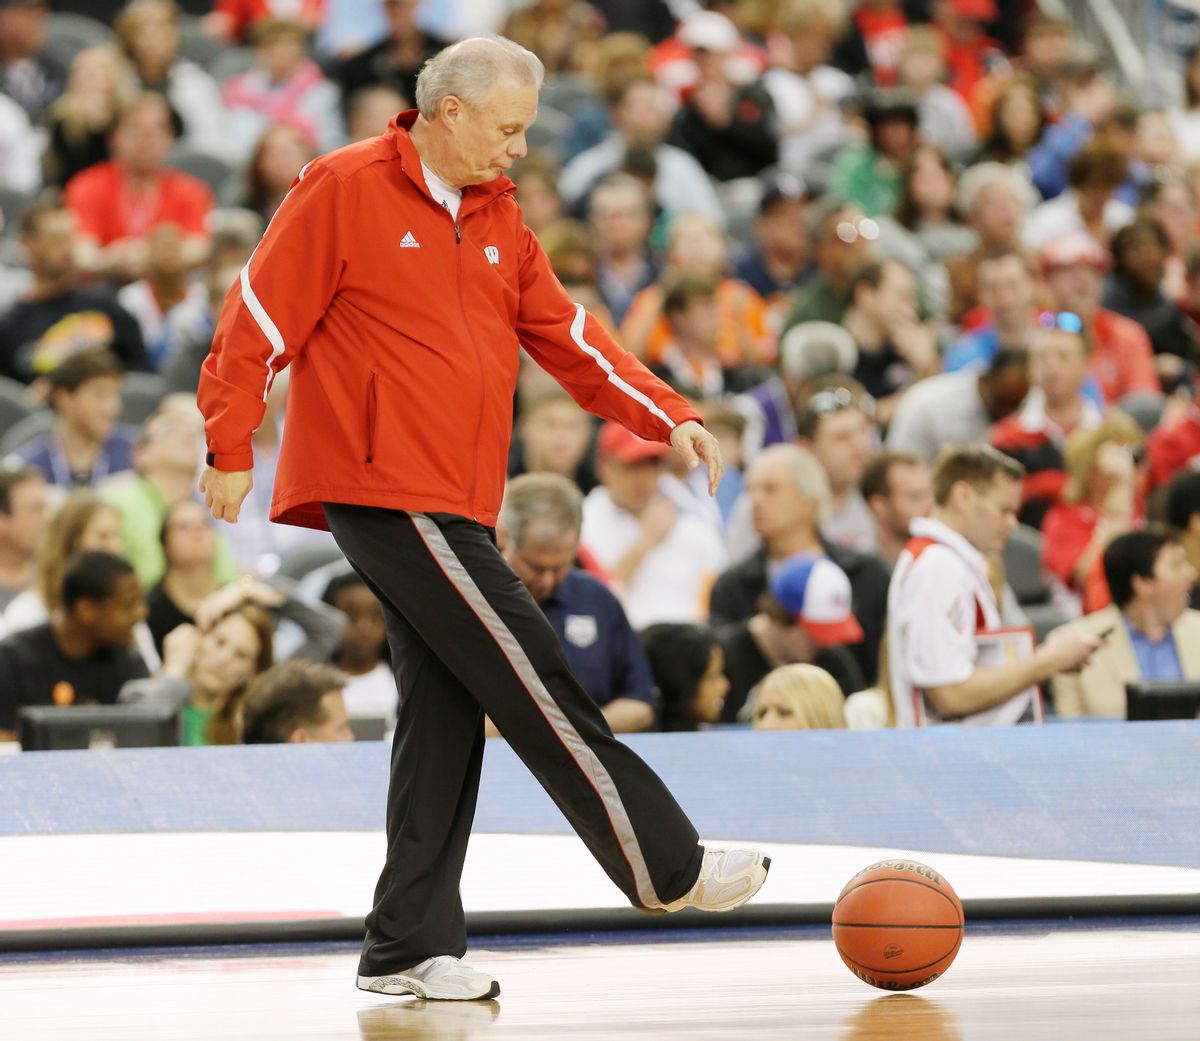 Wisconsin head coach Bo Ryan clears a ball from the floor during practice for an NCAA Final Four tournament college basketball semifinal game Friday, April 4, 2014, in Dallas. Wisconsin plays Kentucky on Saturday, April 5, 2014. (AP Photo/Charlie Neibergall) (Charlie Neibergall)